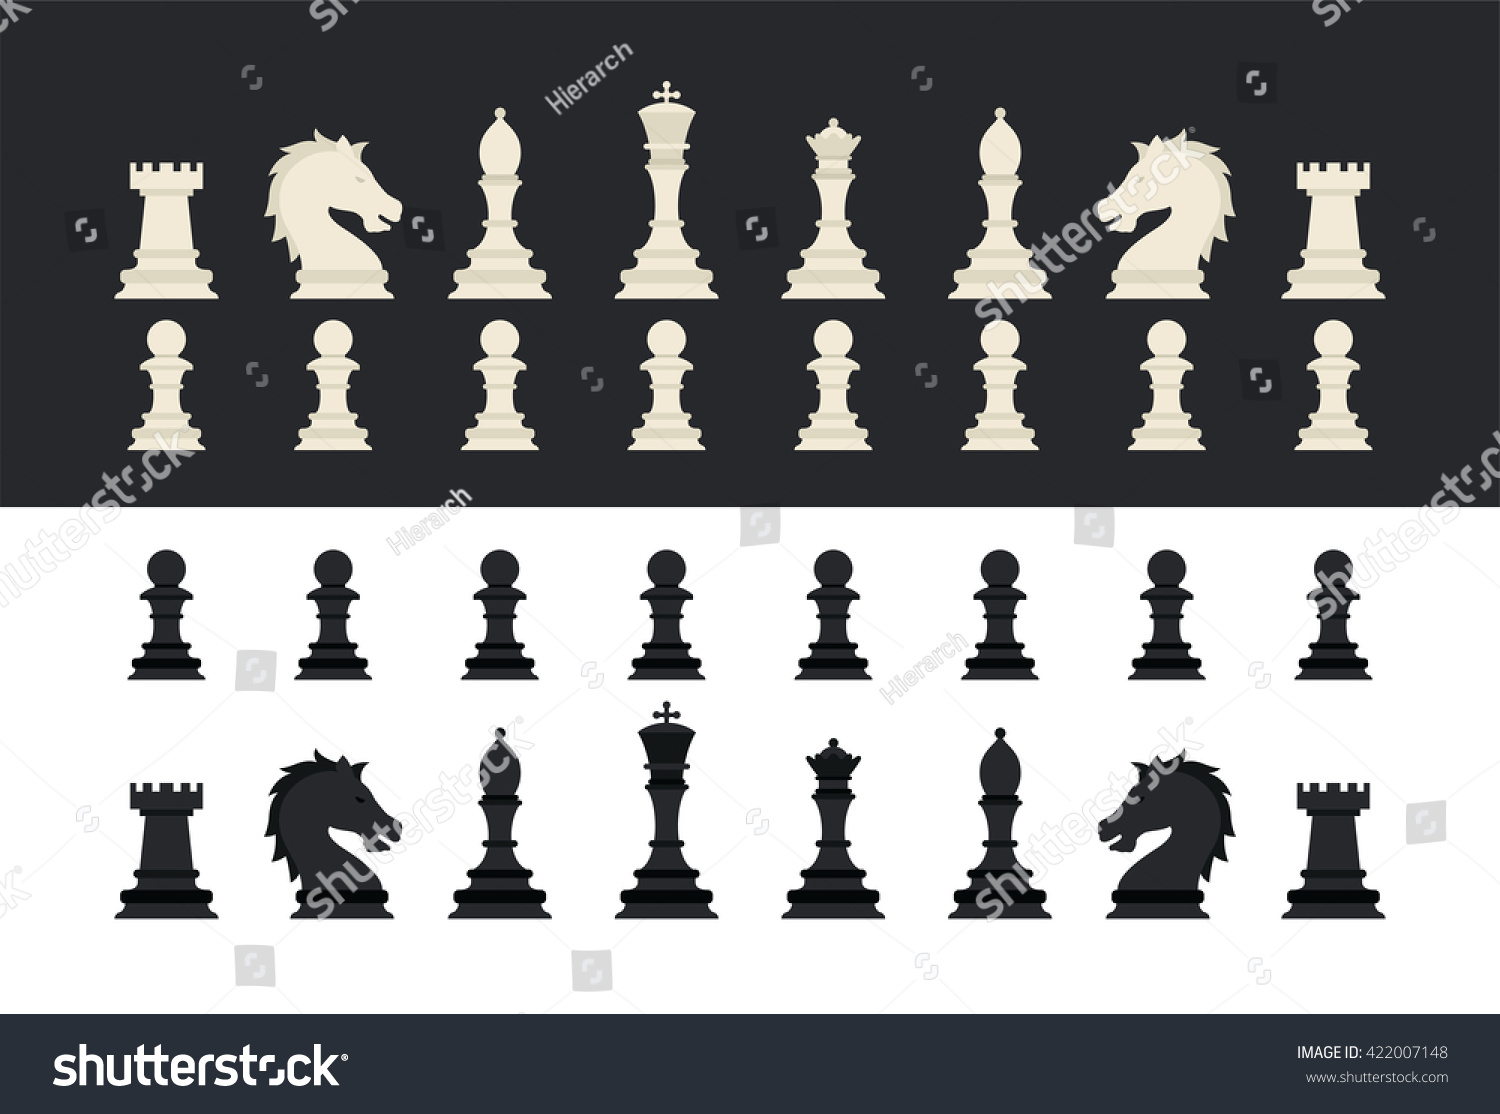 SVG of Black & White chess pieces icons set. Vector illustration. svg